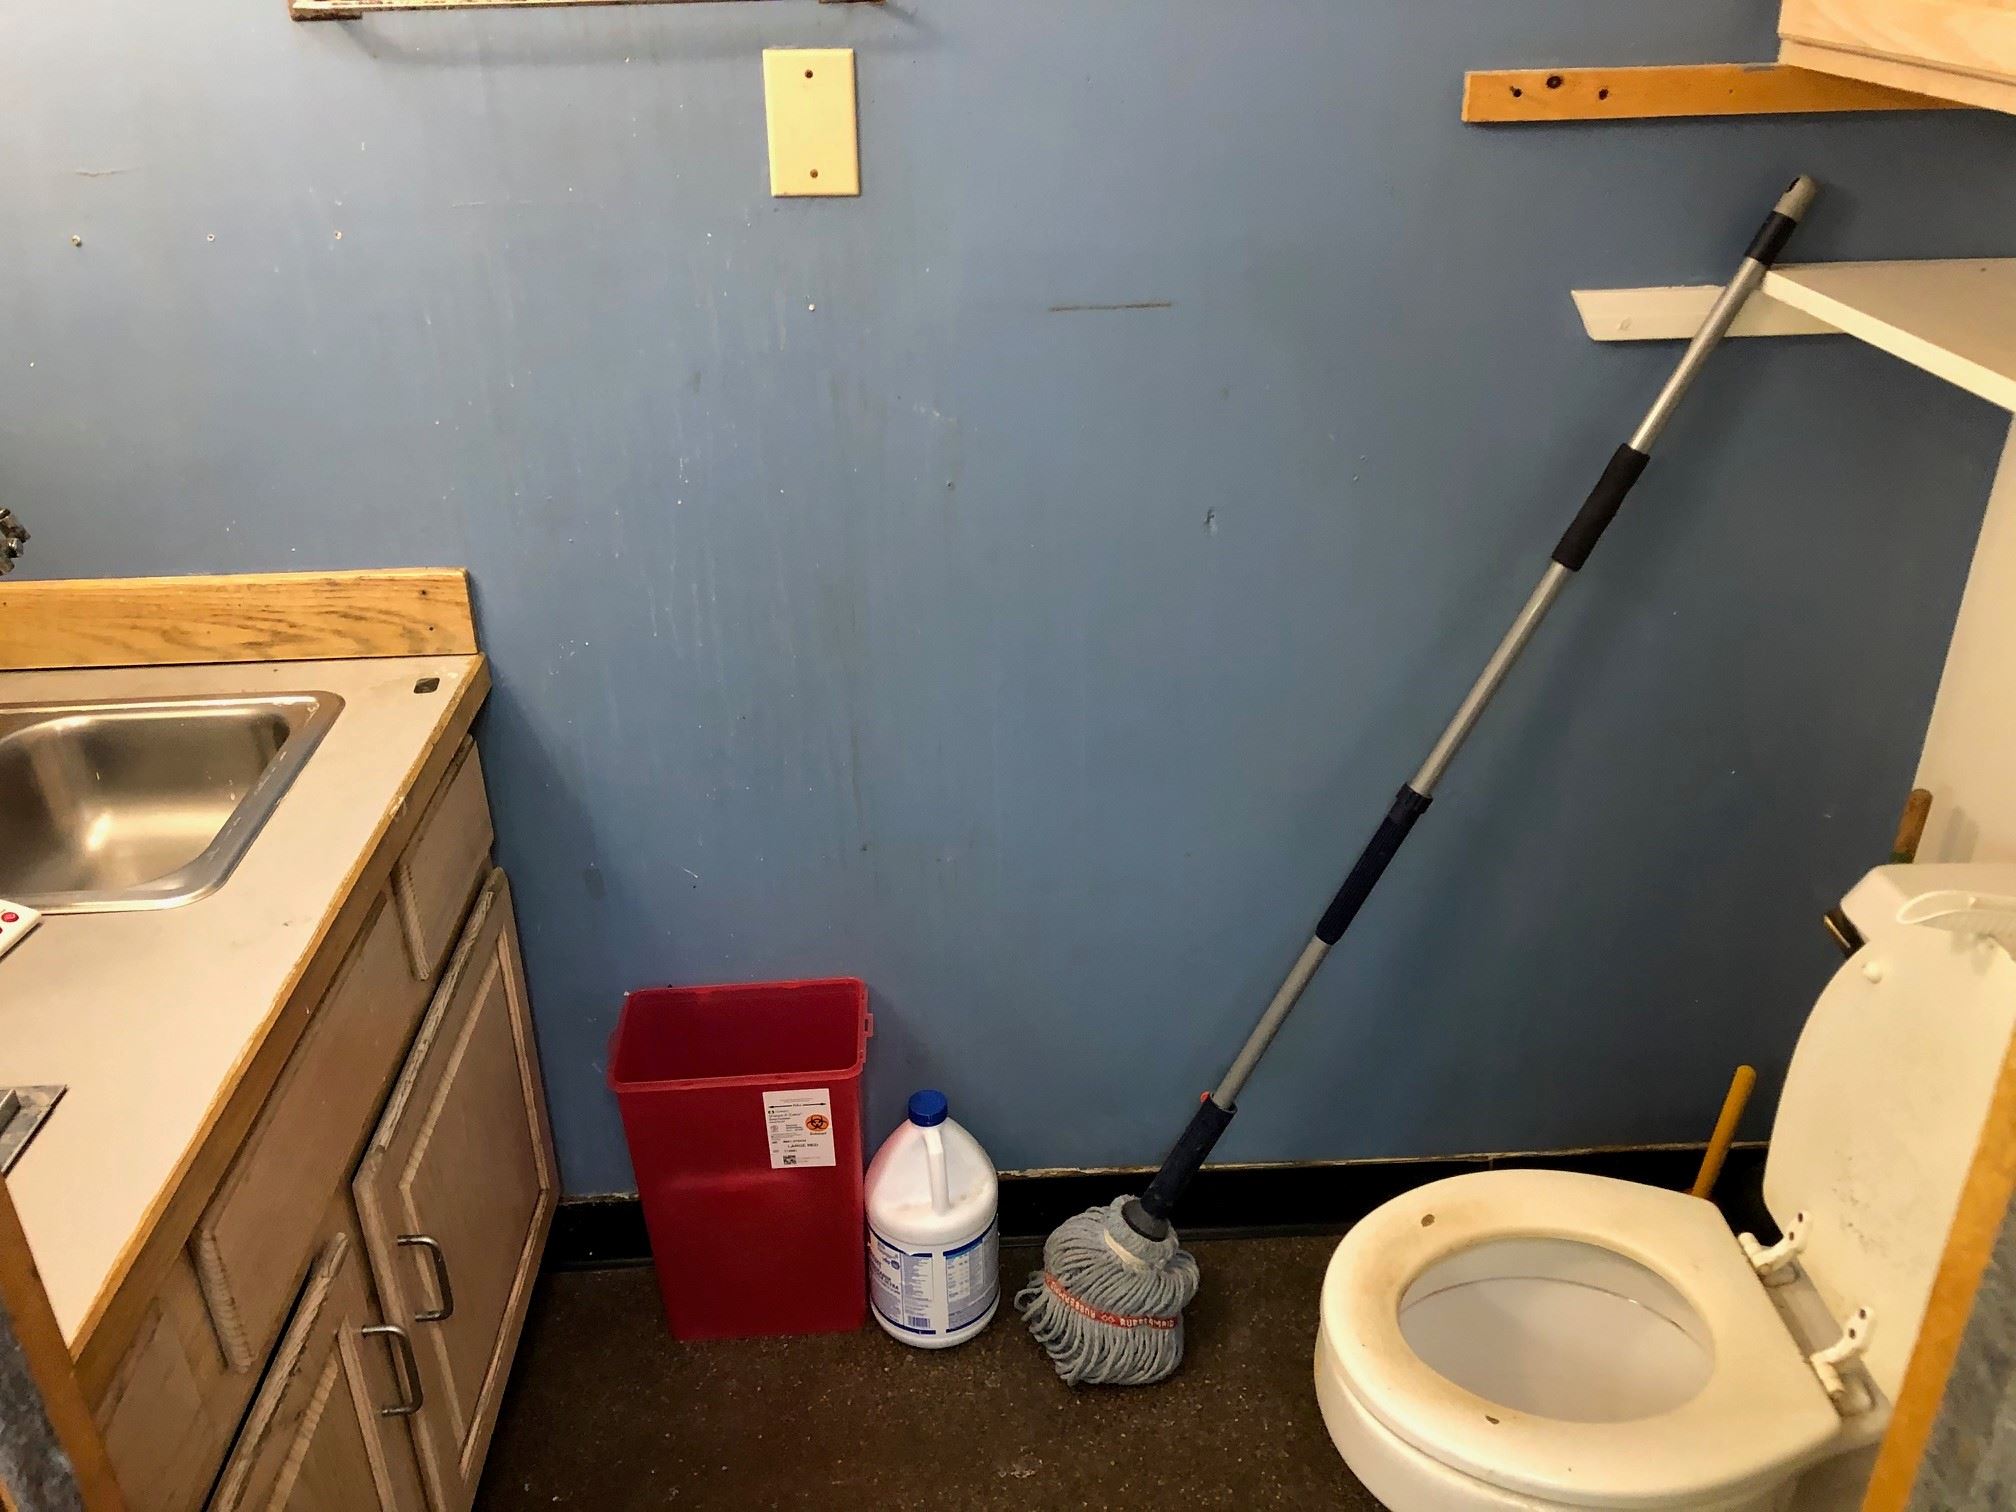 staff lavatory at south end of Lab